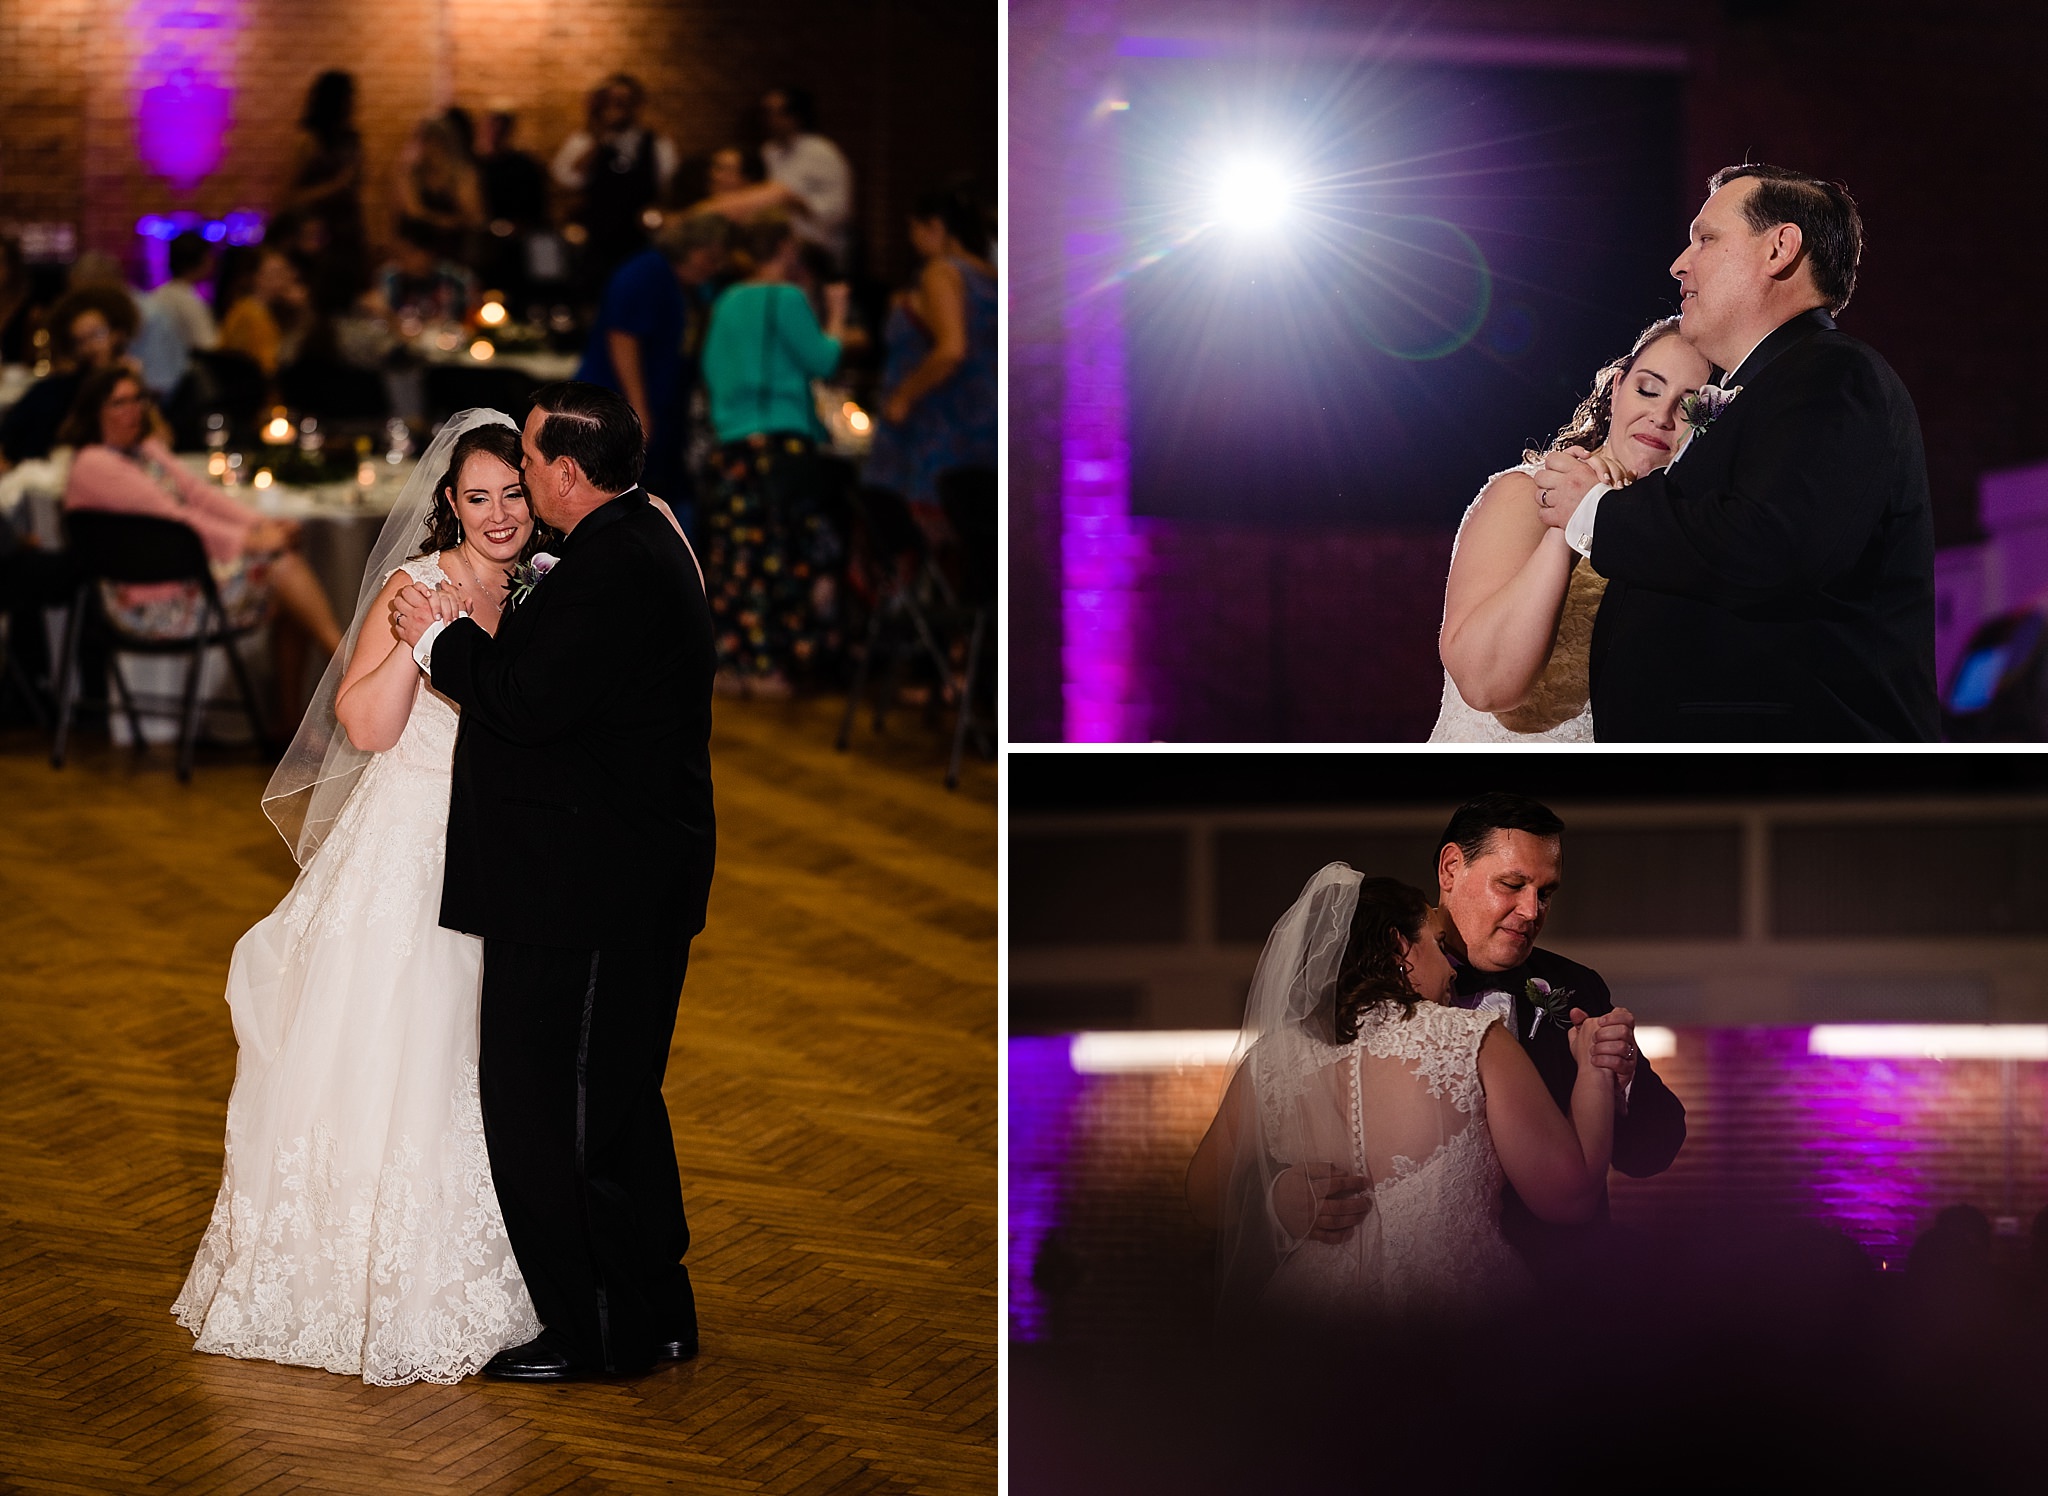 The bride and her father share a special dance during this Durham Armory wedding from Raleigh wedding photographers